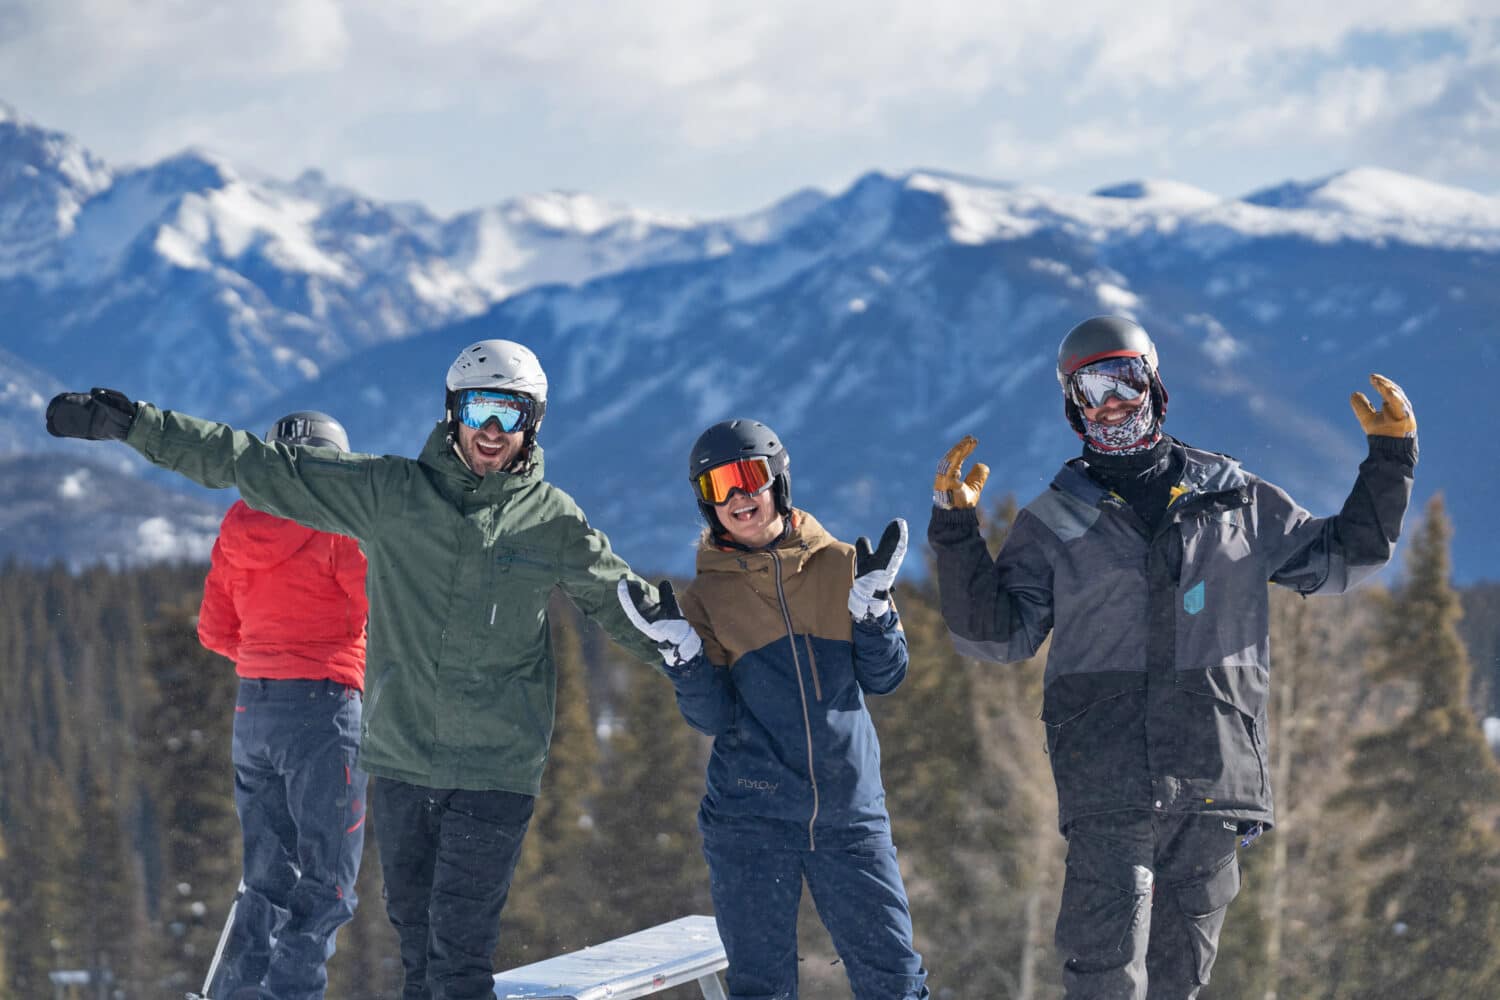 Friends in ski gear smile with arms raised in front of a wintery mountain scene